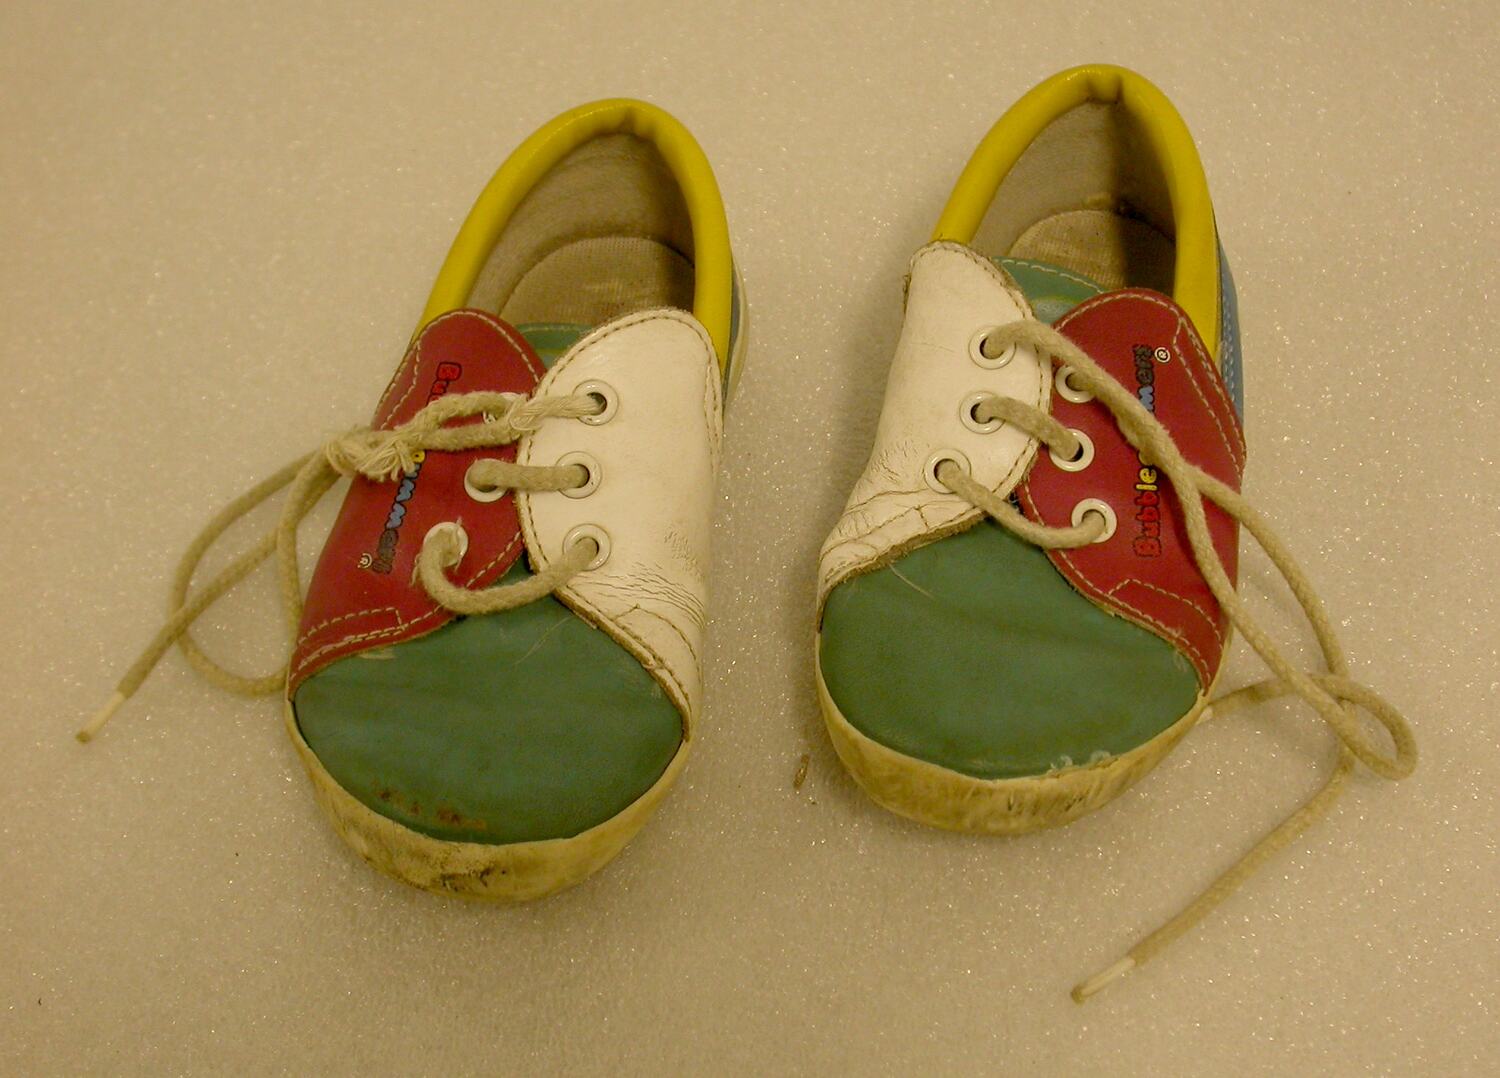 Shoes - Bata, Lace-up, Multicoloured Leather, late 1980s